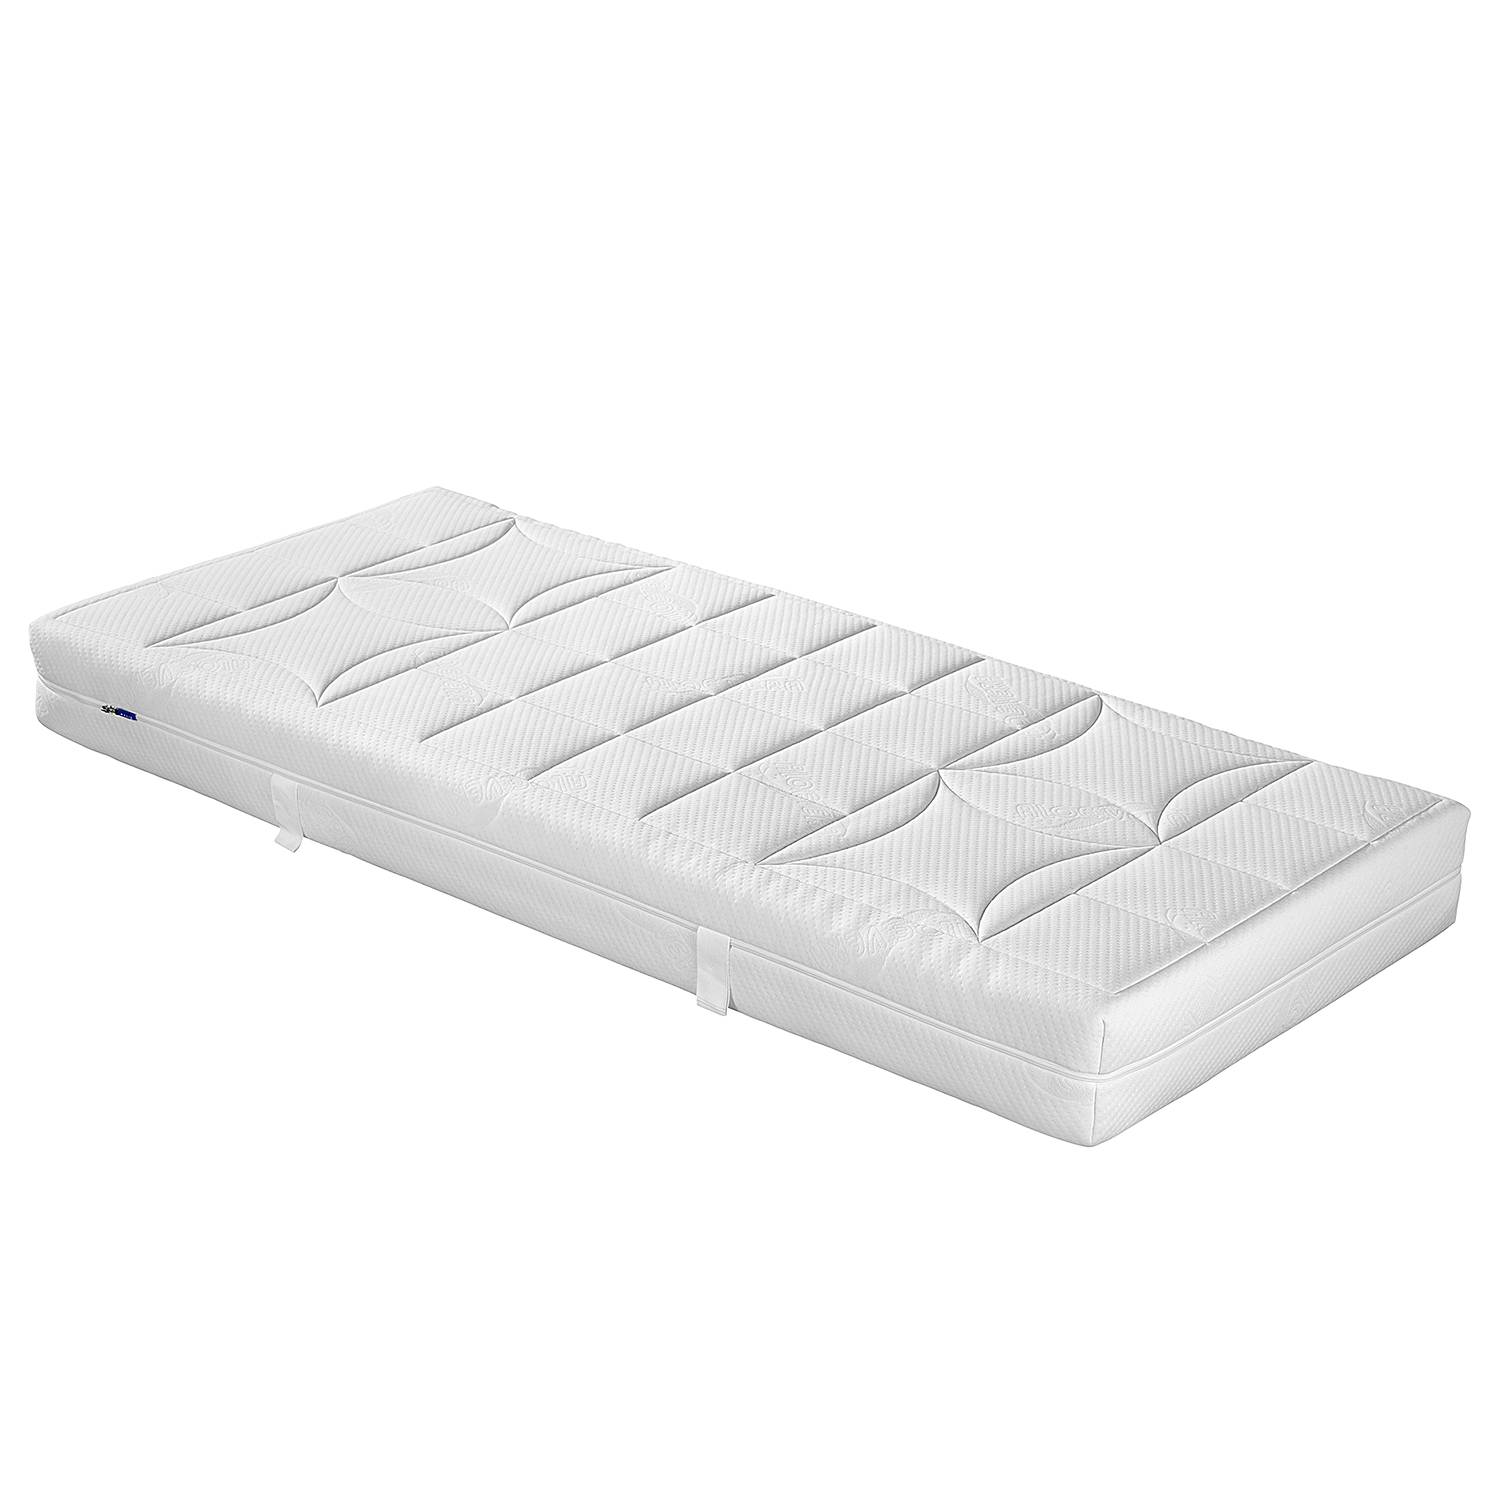 Matelas en mousse froide Holiday